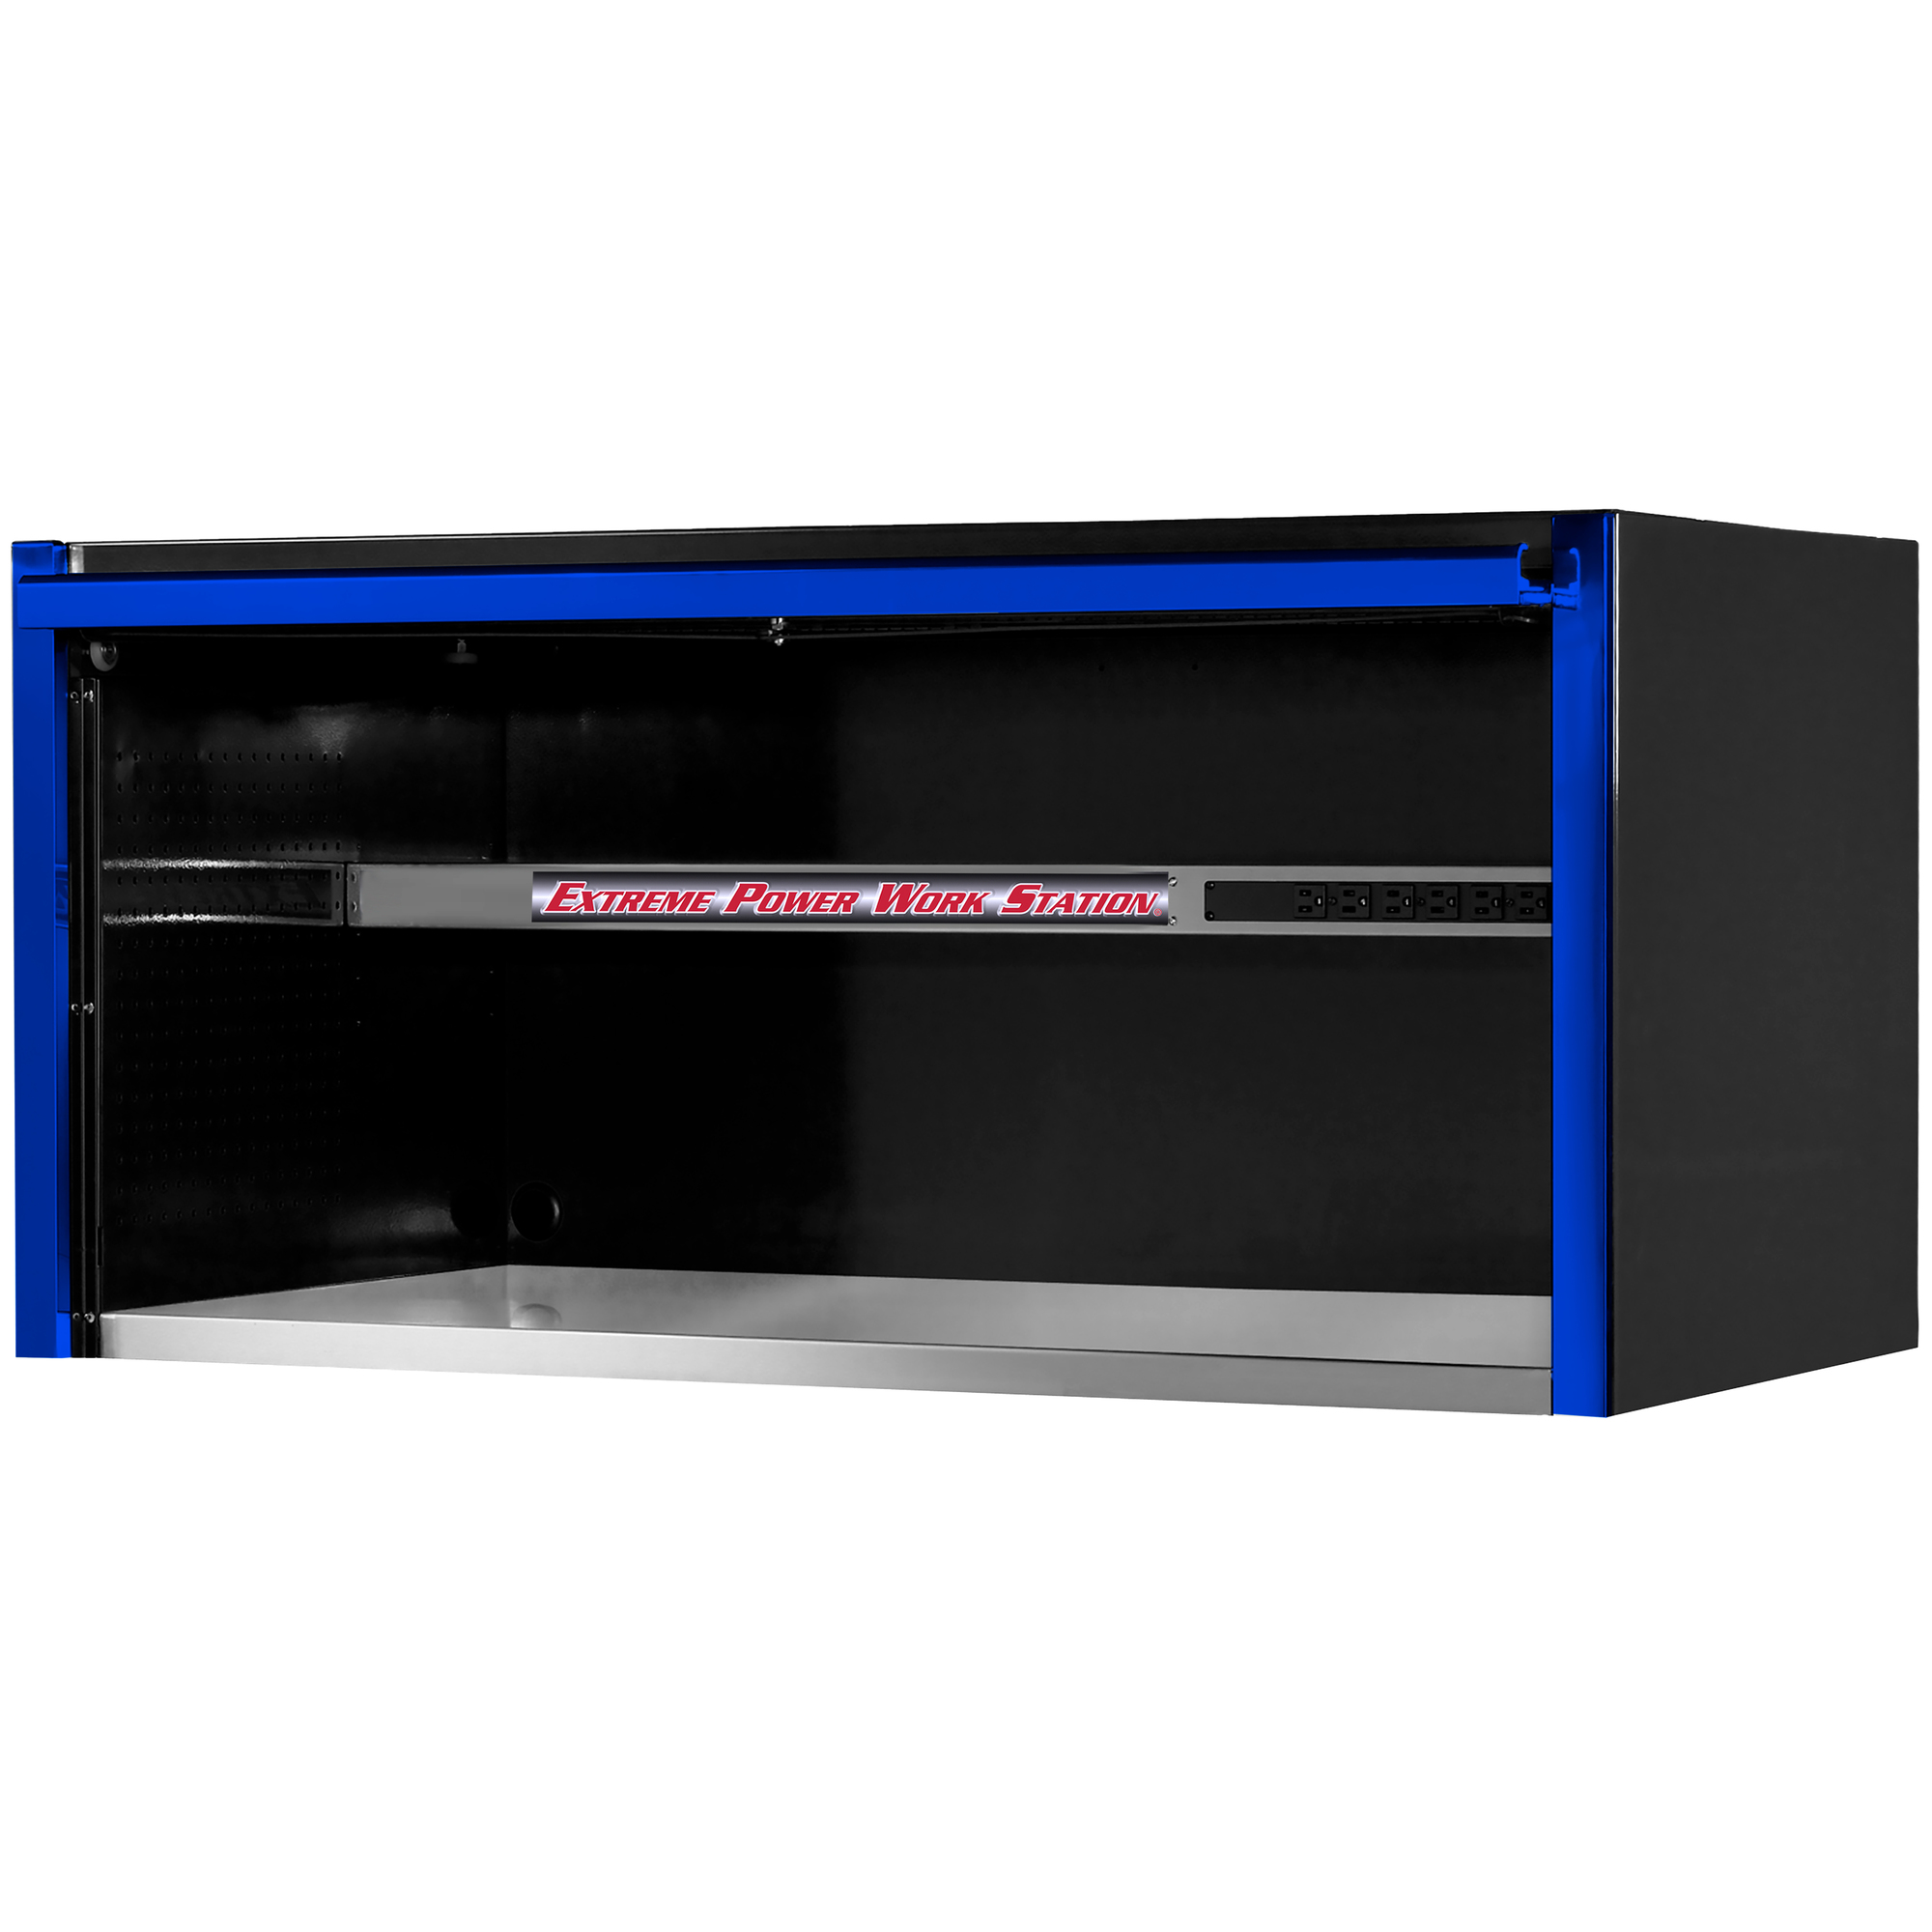 Extreme Tools, EX Pro Power Workstation Hutch, 55Inch x 30Inch, BKBL, Width 55 in, Height 26.375 in, Color Black, Model EX5501HCQBKBL